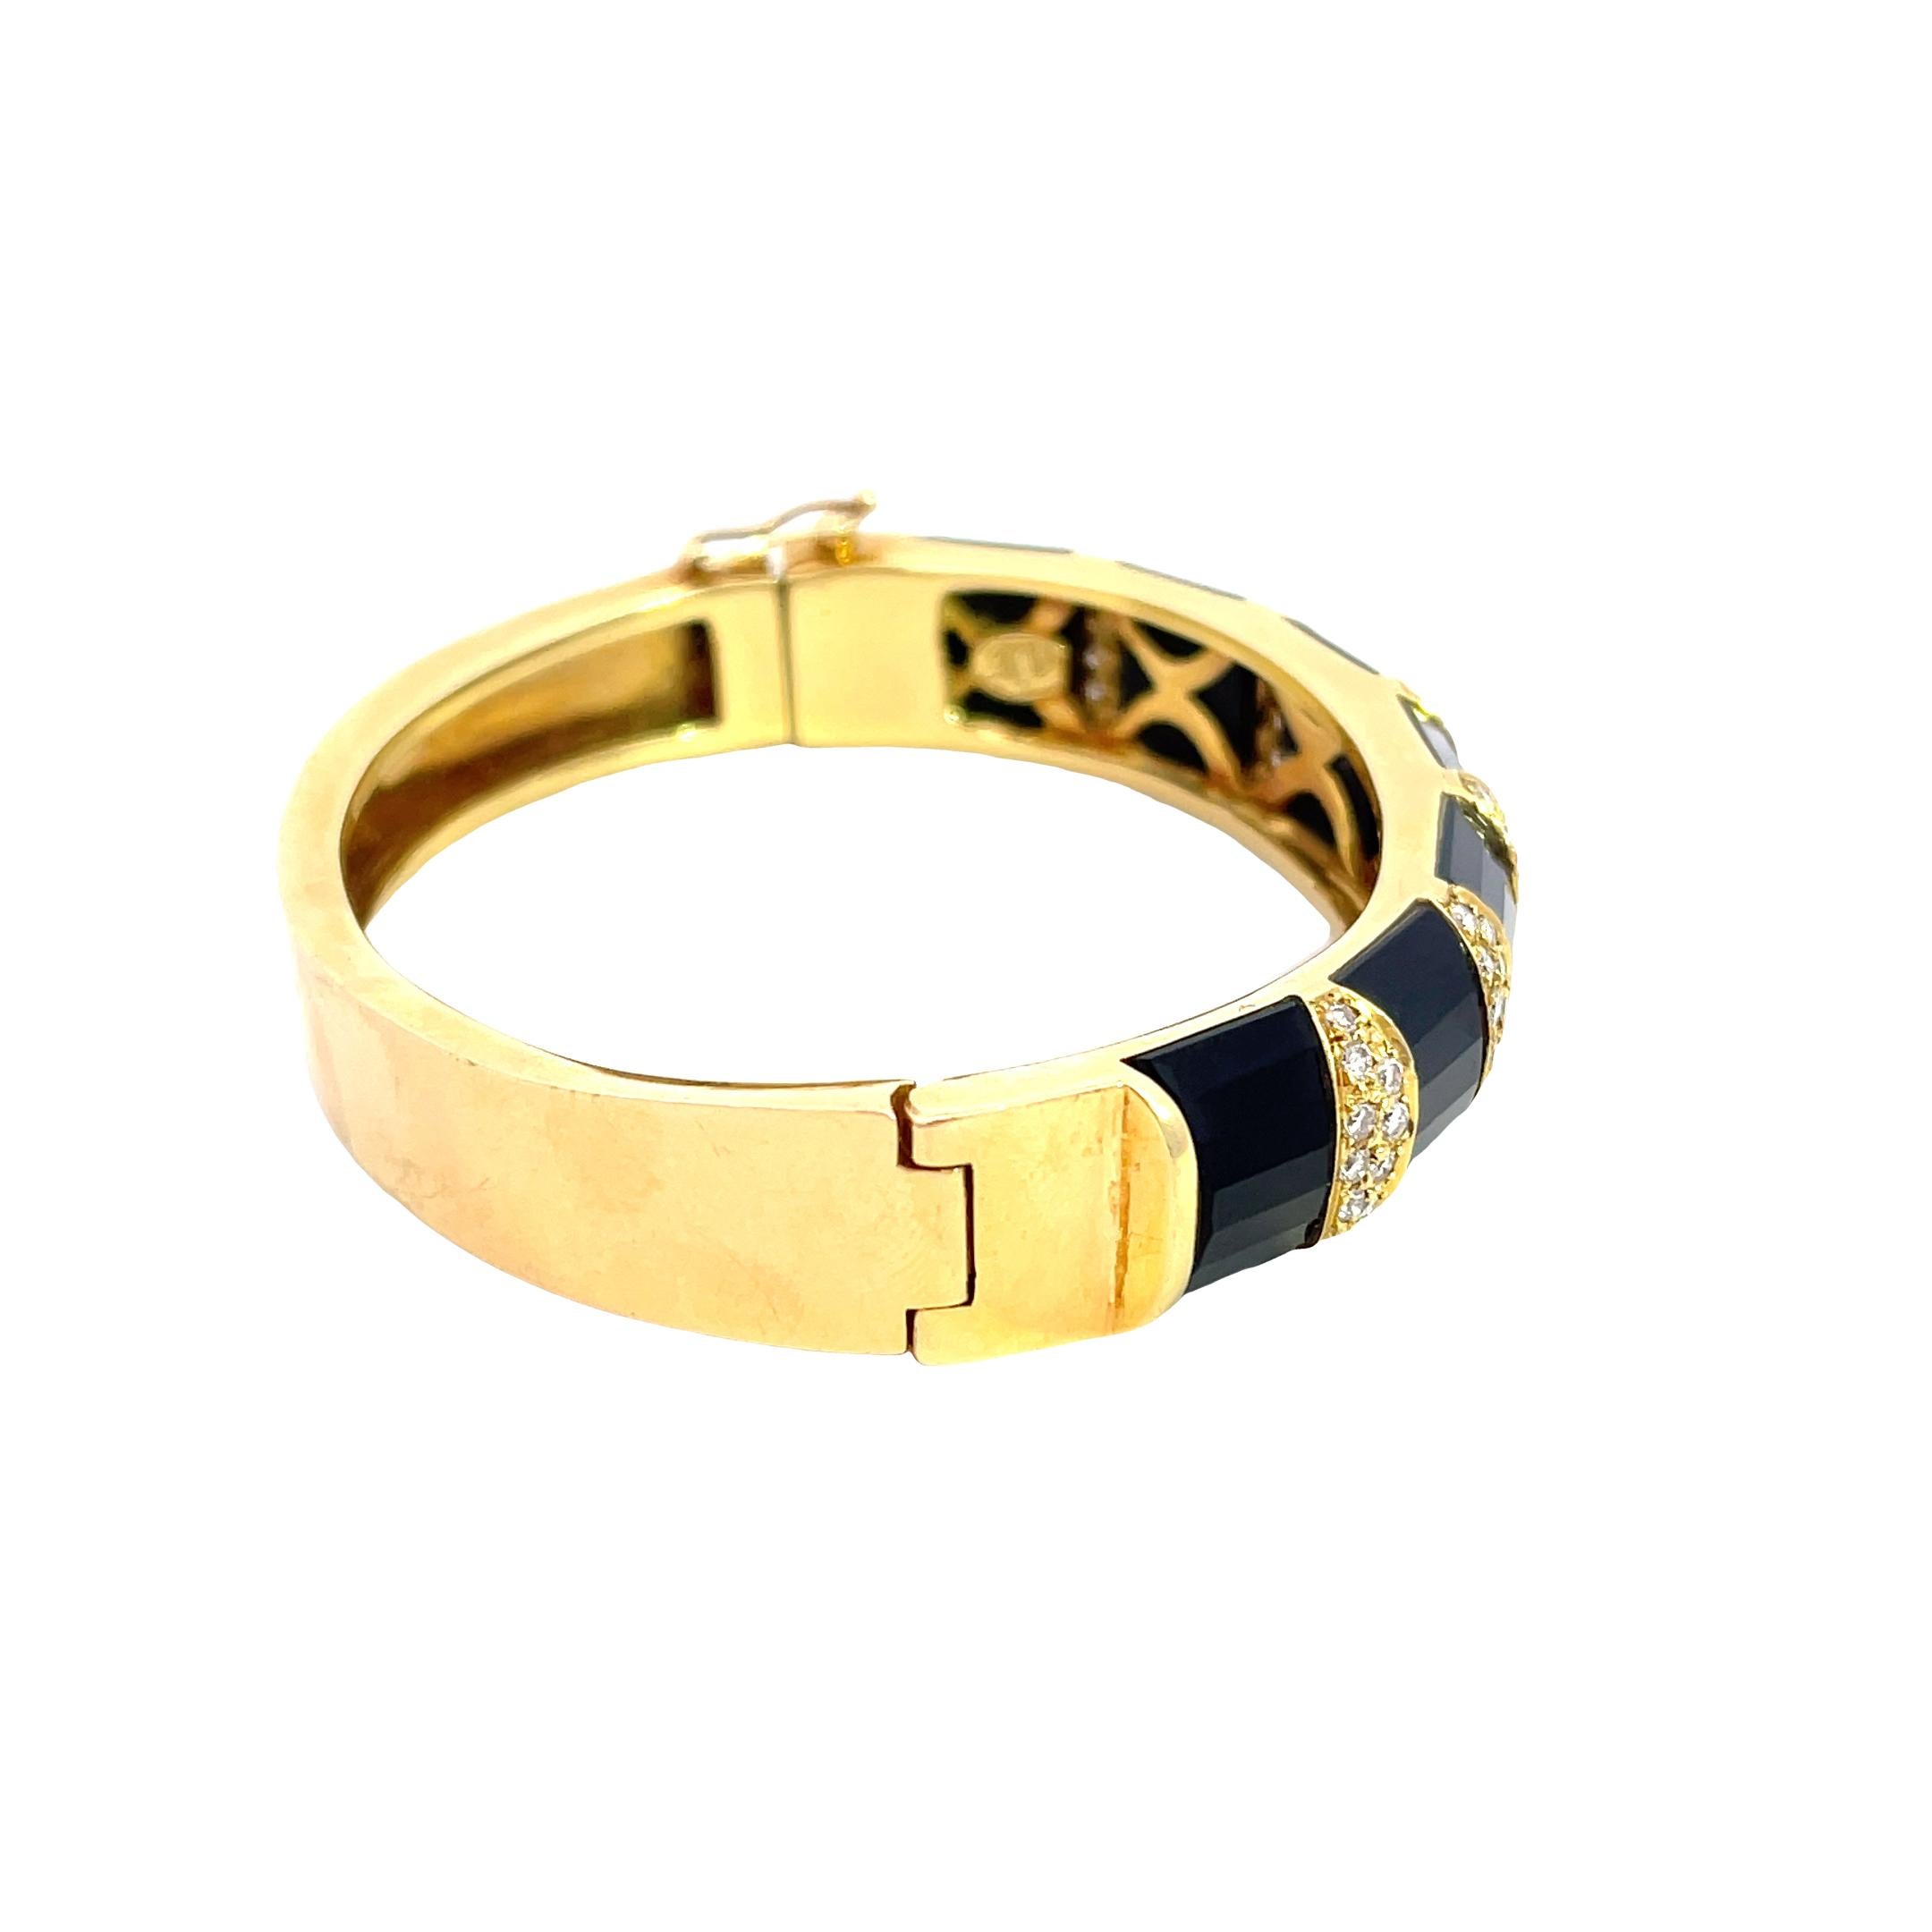 Introducing our exquisite 18K Yellow Gold 48.30 gram Diamond and Onyx Cuff Bangle, a dazzling addition to your jewelry collection. An Impressive piece of jewelry will definitely make a statement. Made from lustrous 18K yellow gold, the Bangle